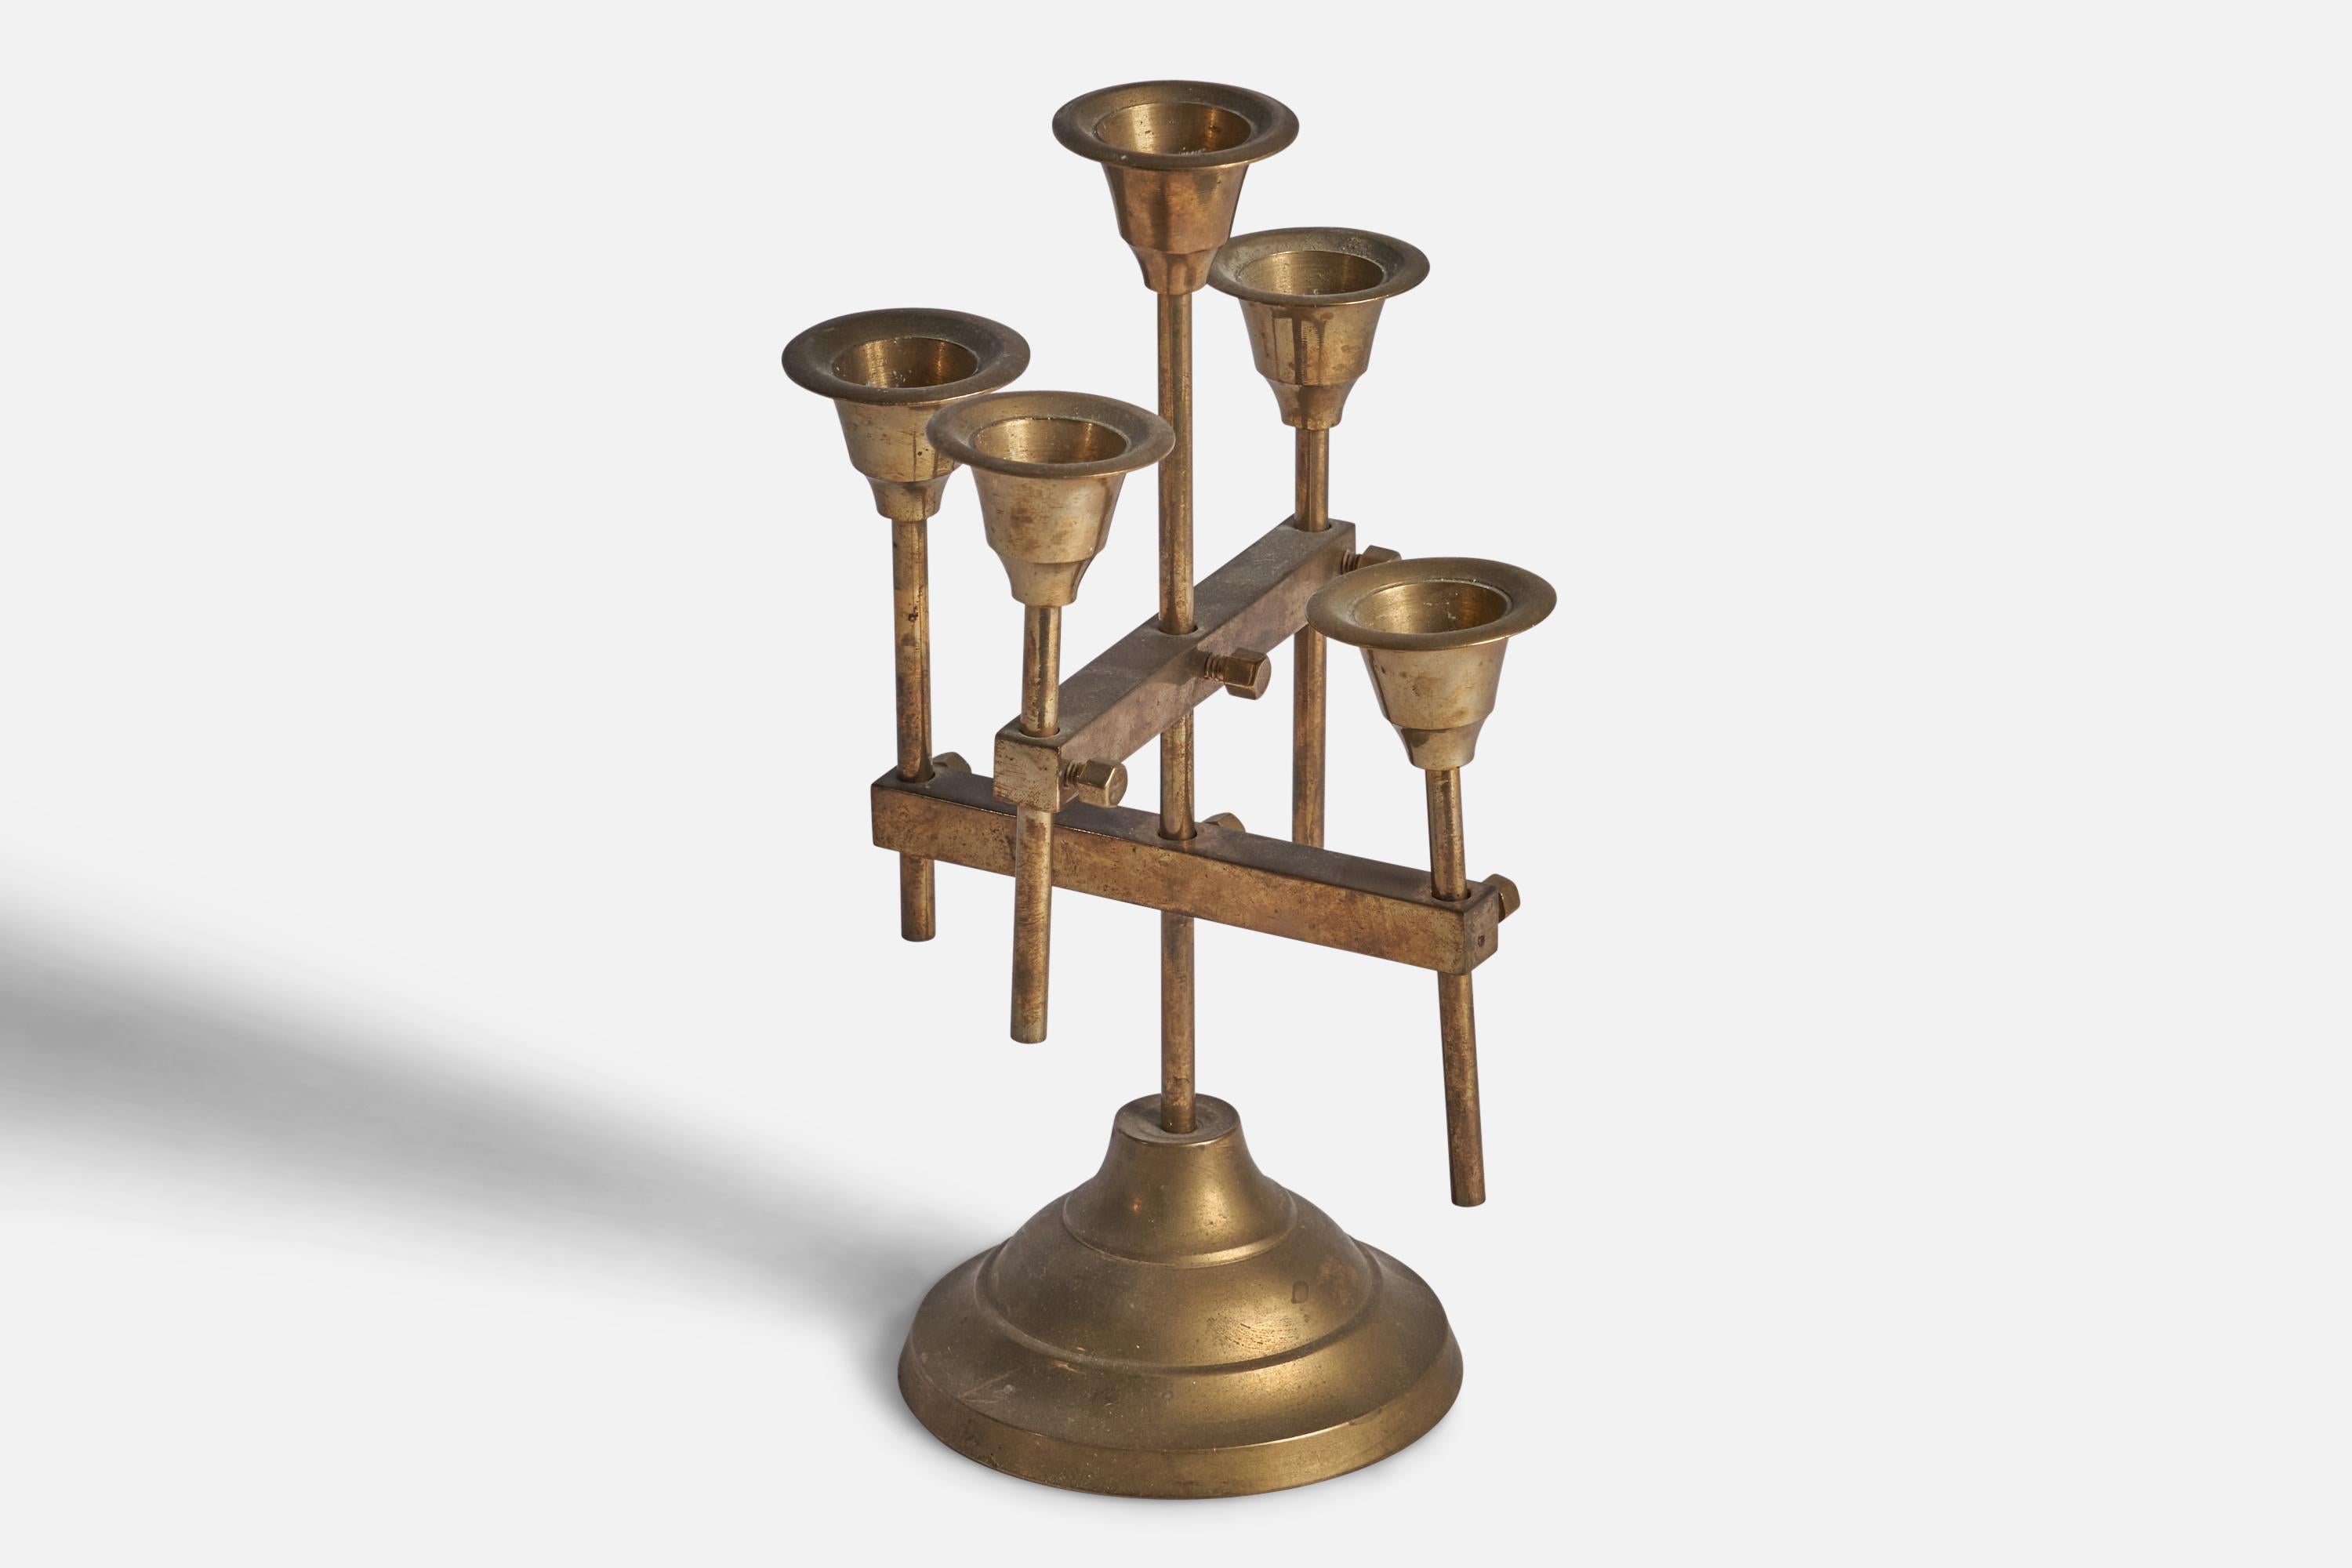 An adjustable brass candelabra designed and produced in Denmark, 1940s.

Fits 0.75”-0.80” diameter candles